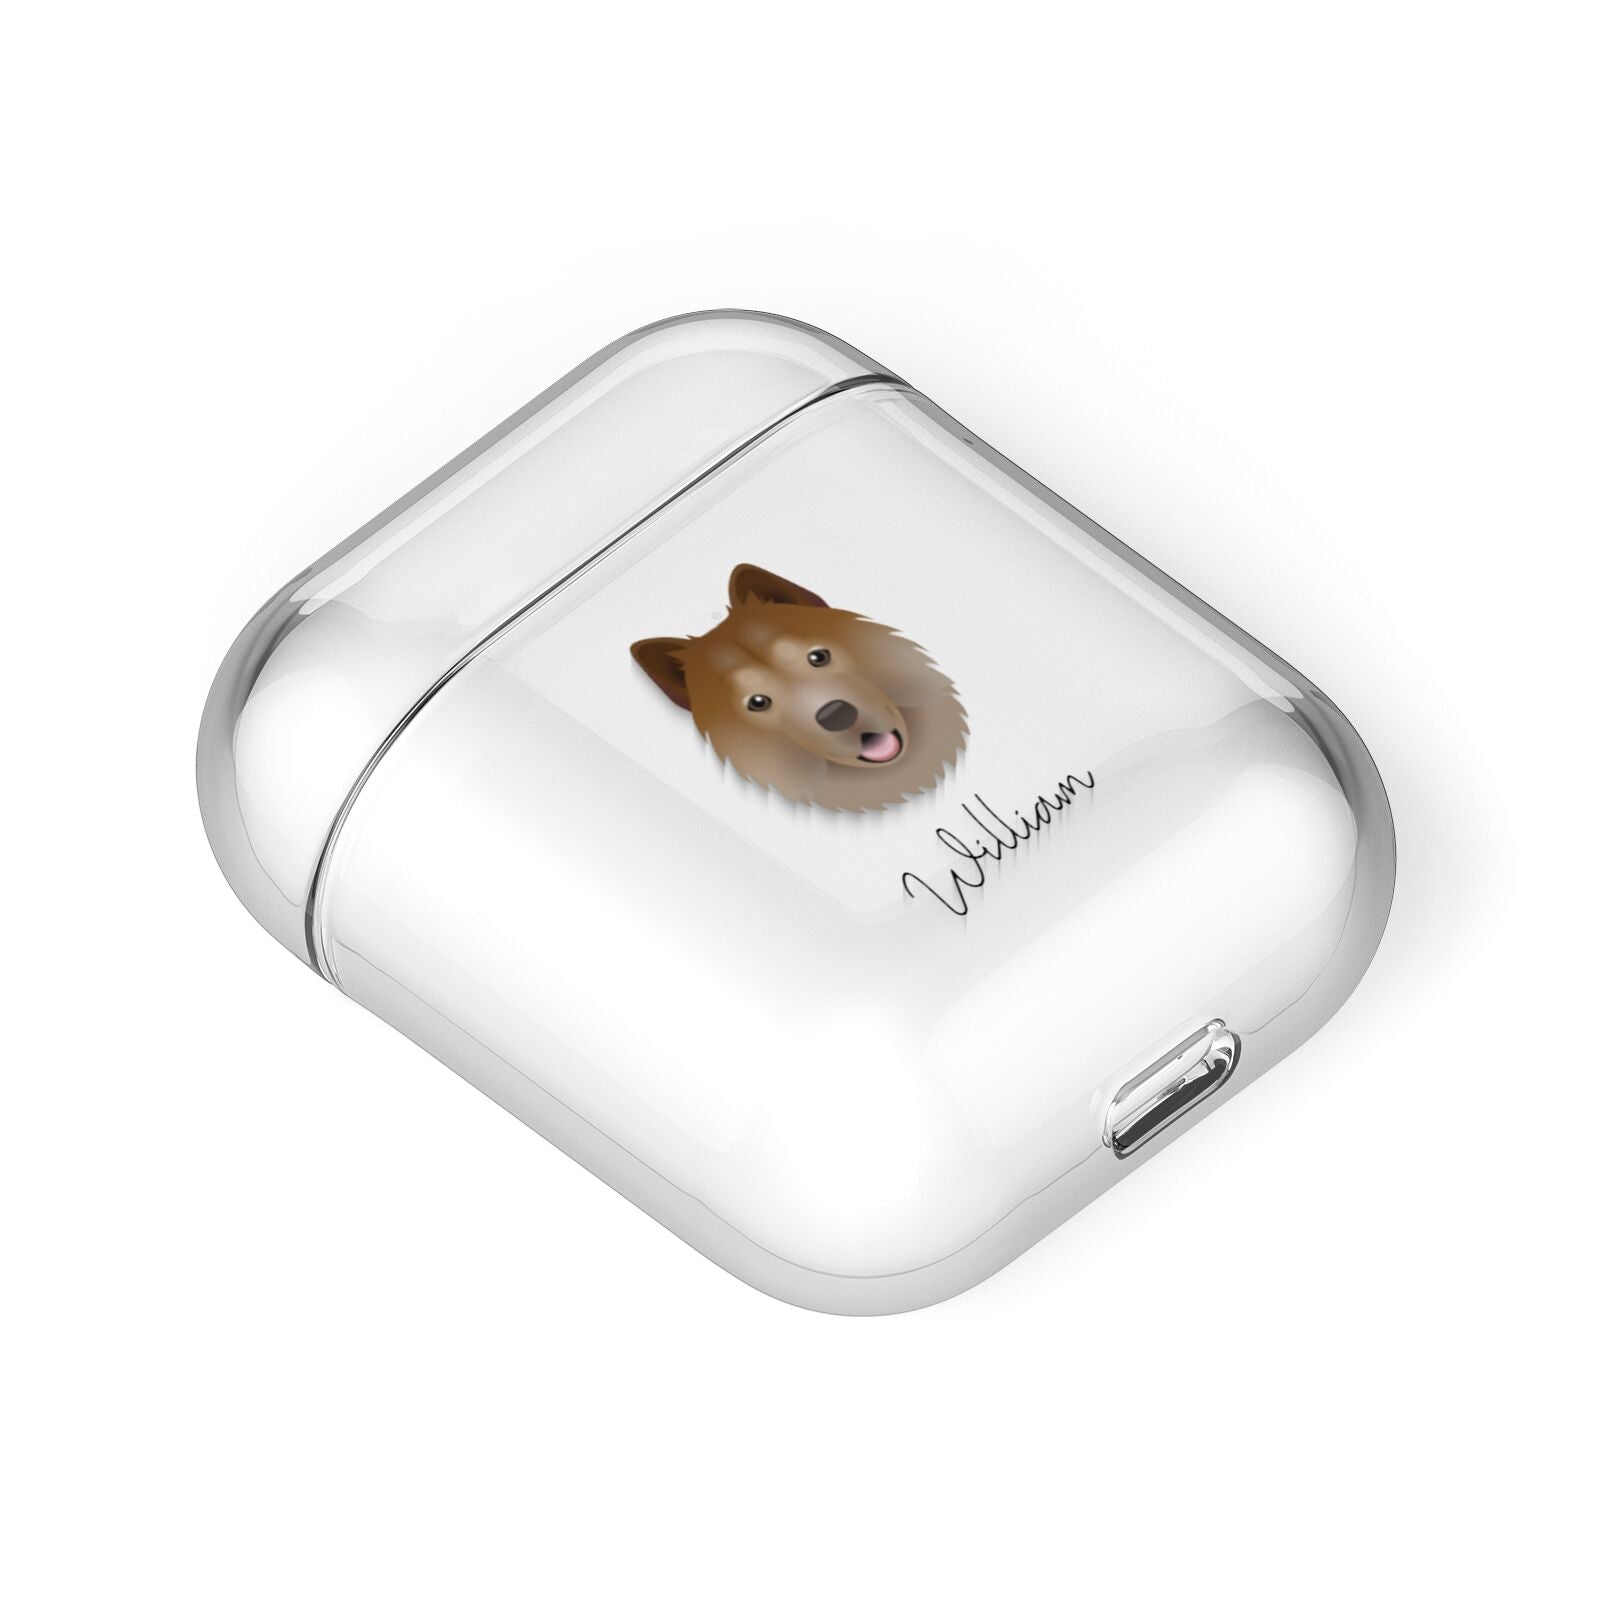 Chusky Personalised AirPods Case Laid Flat